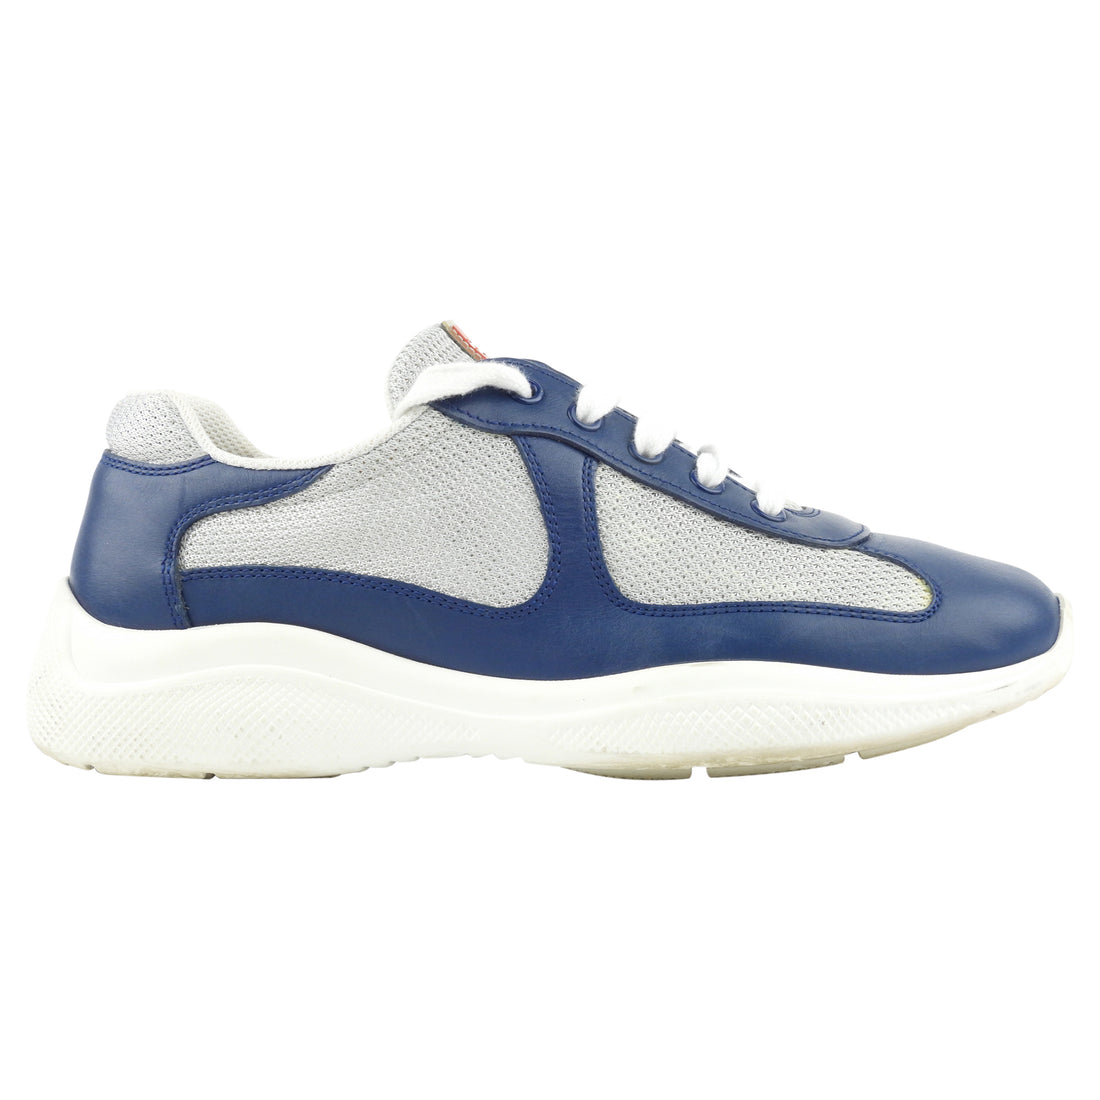 Prada Sport Blue Leather and Mesh Sneakers - 37.5